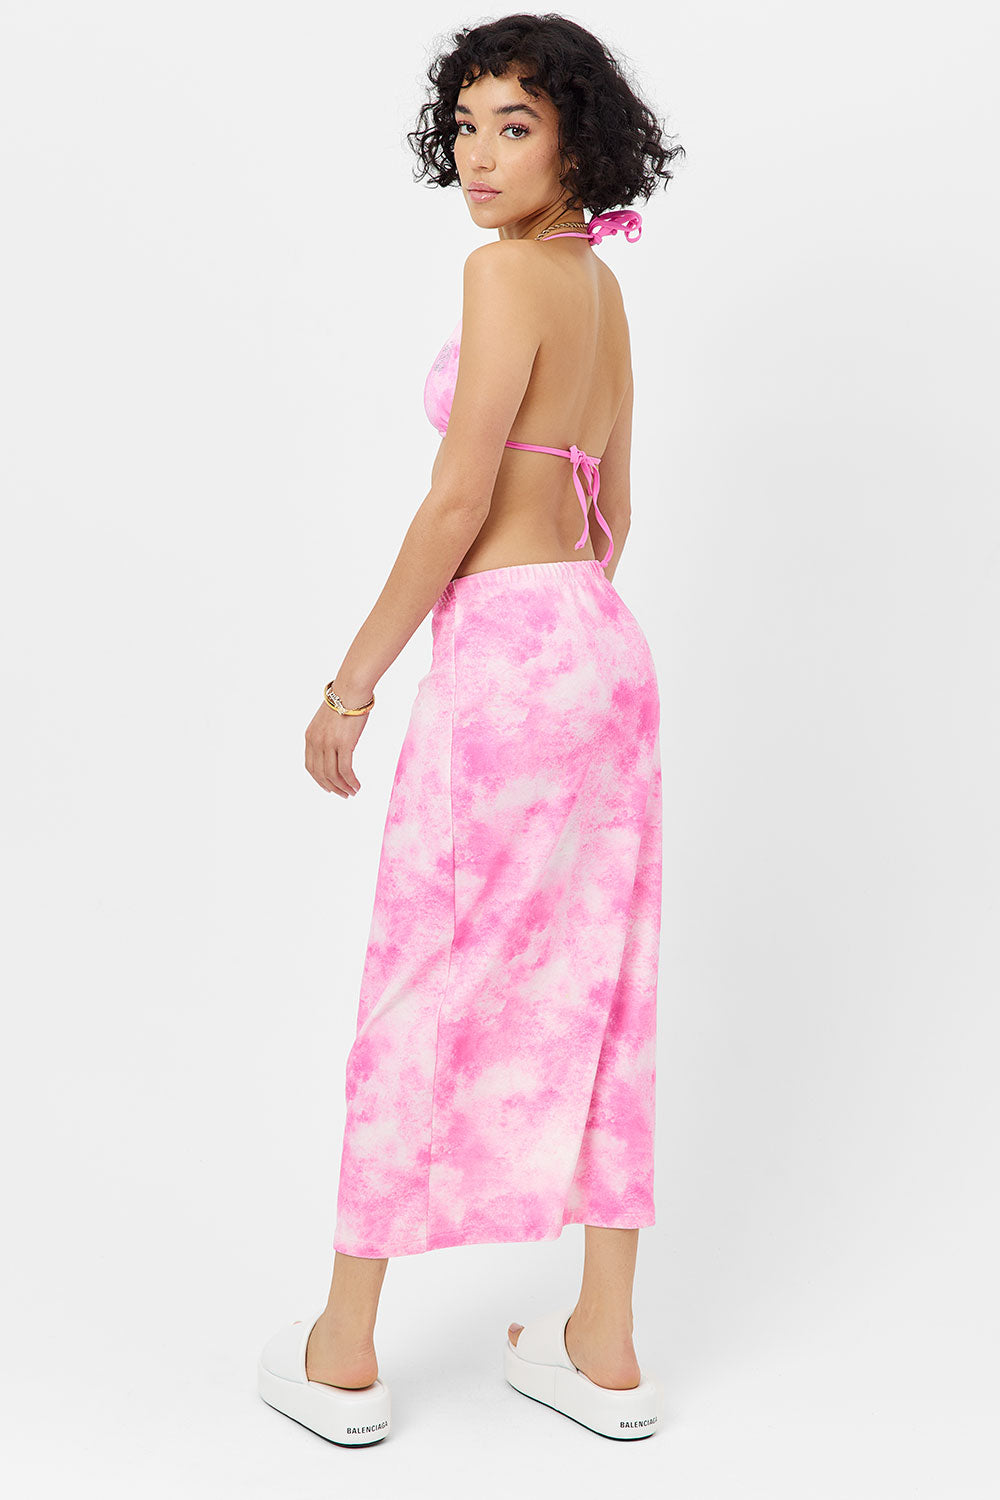 Stacey Terry Maxi Skirt - Distorted Pink Dye